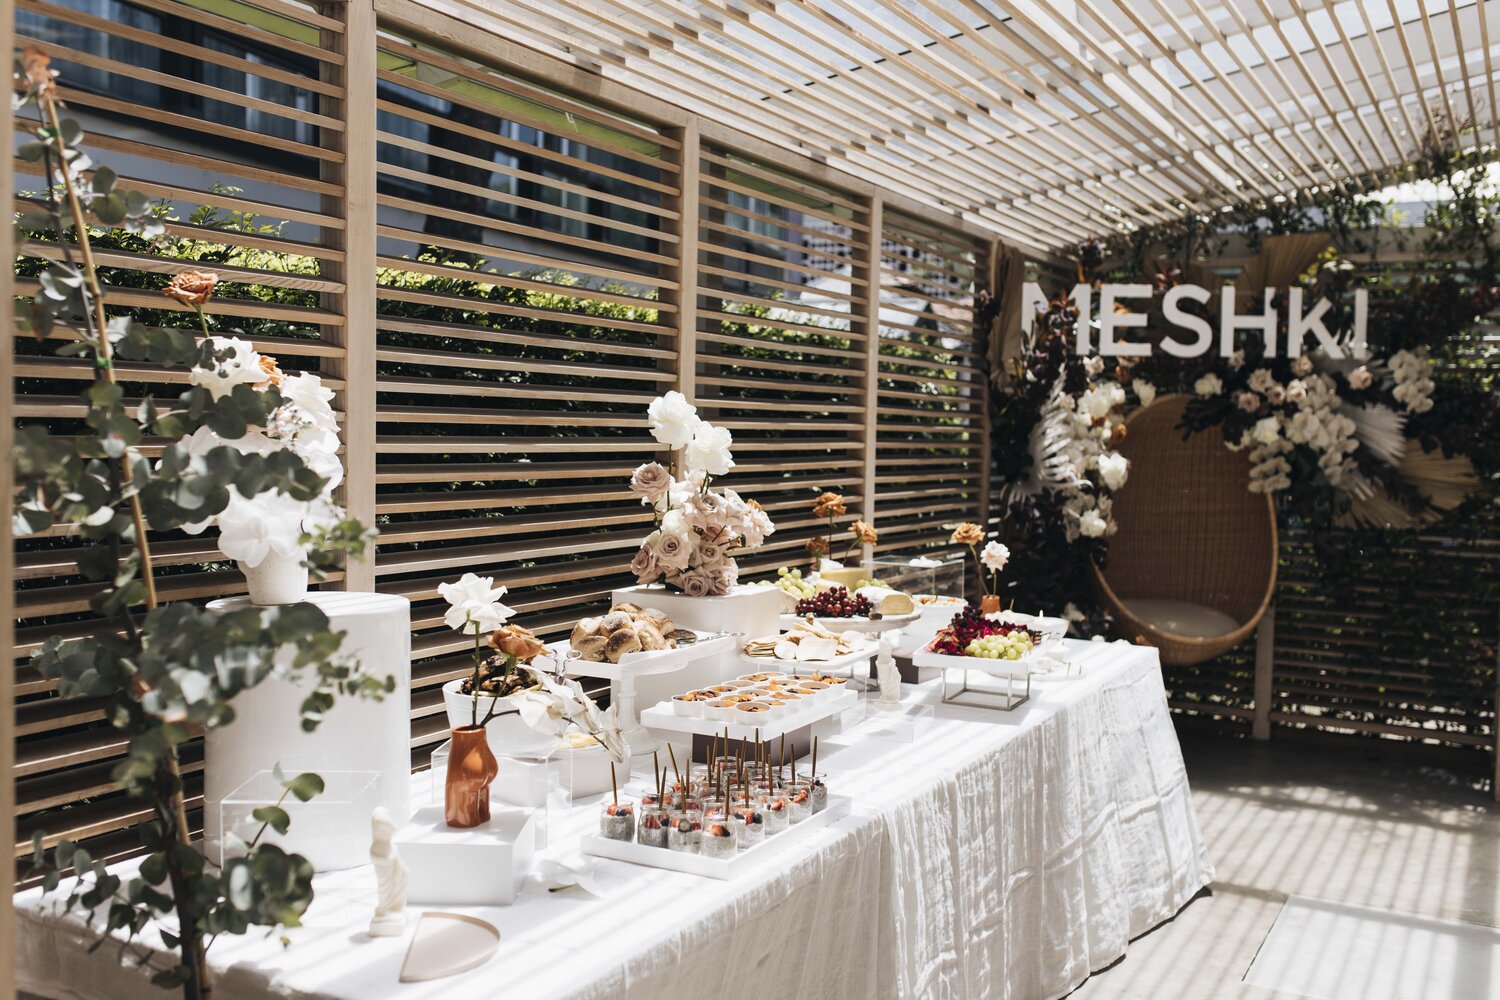 withsmee-sydney-event-stylist-meshki-product-launch-13